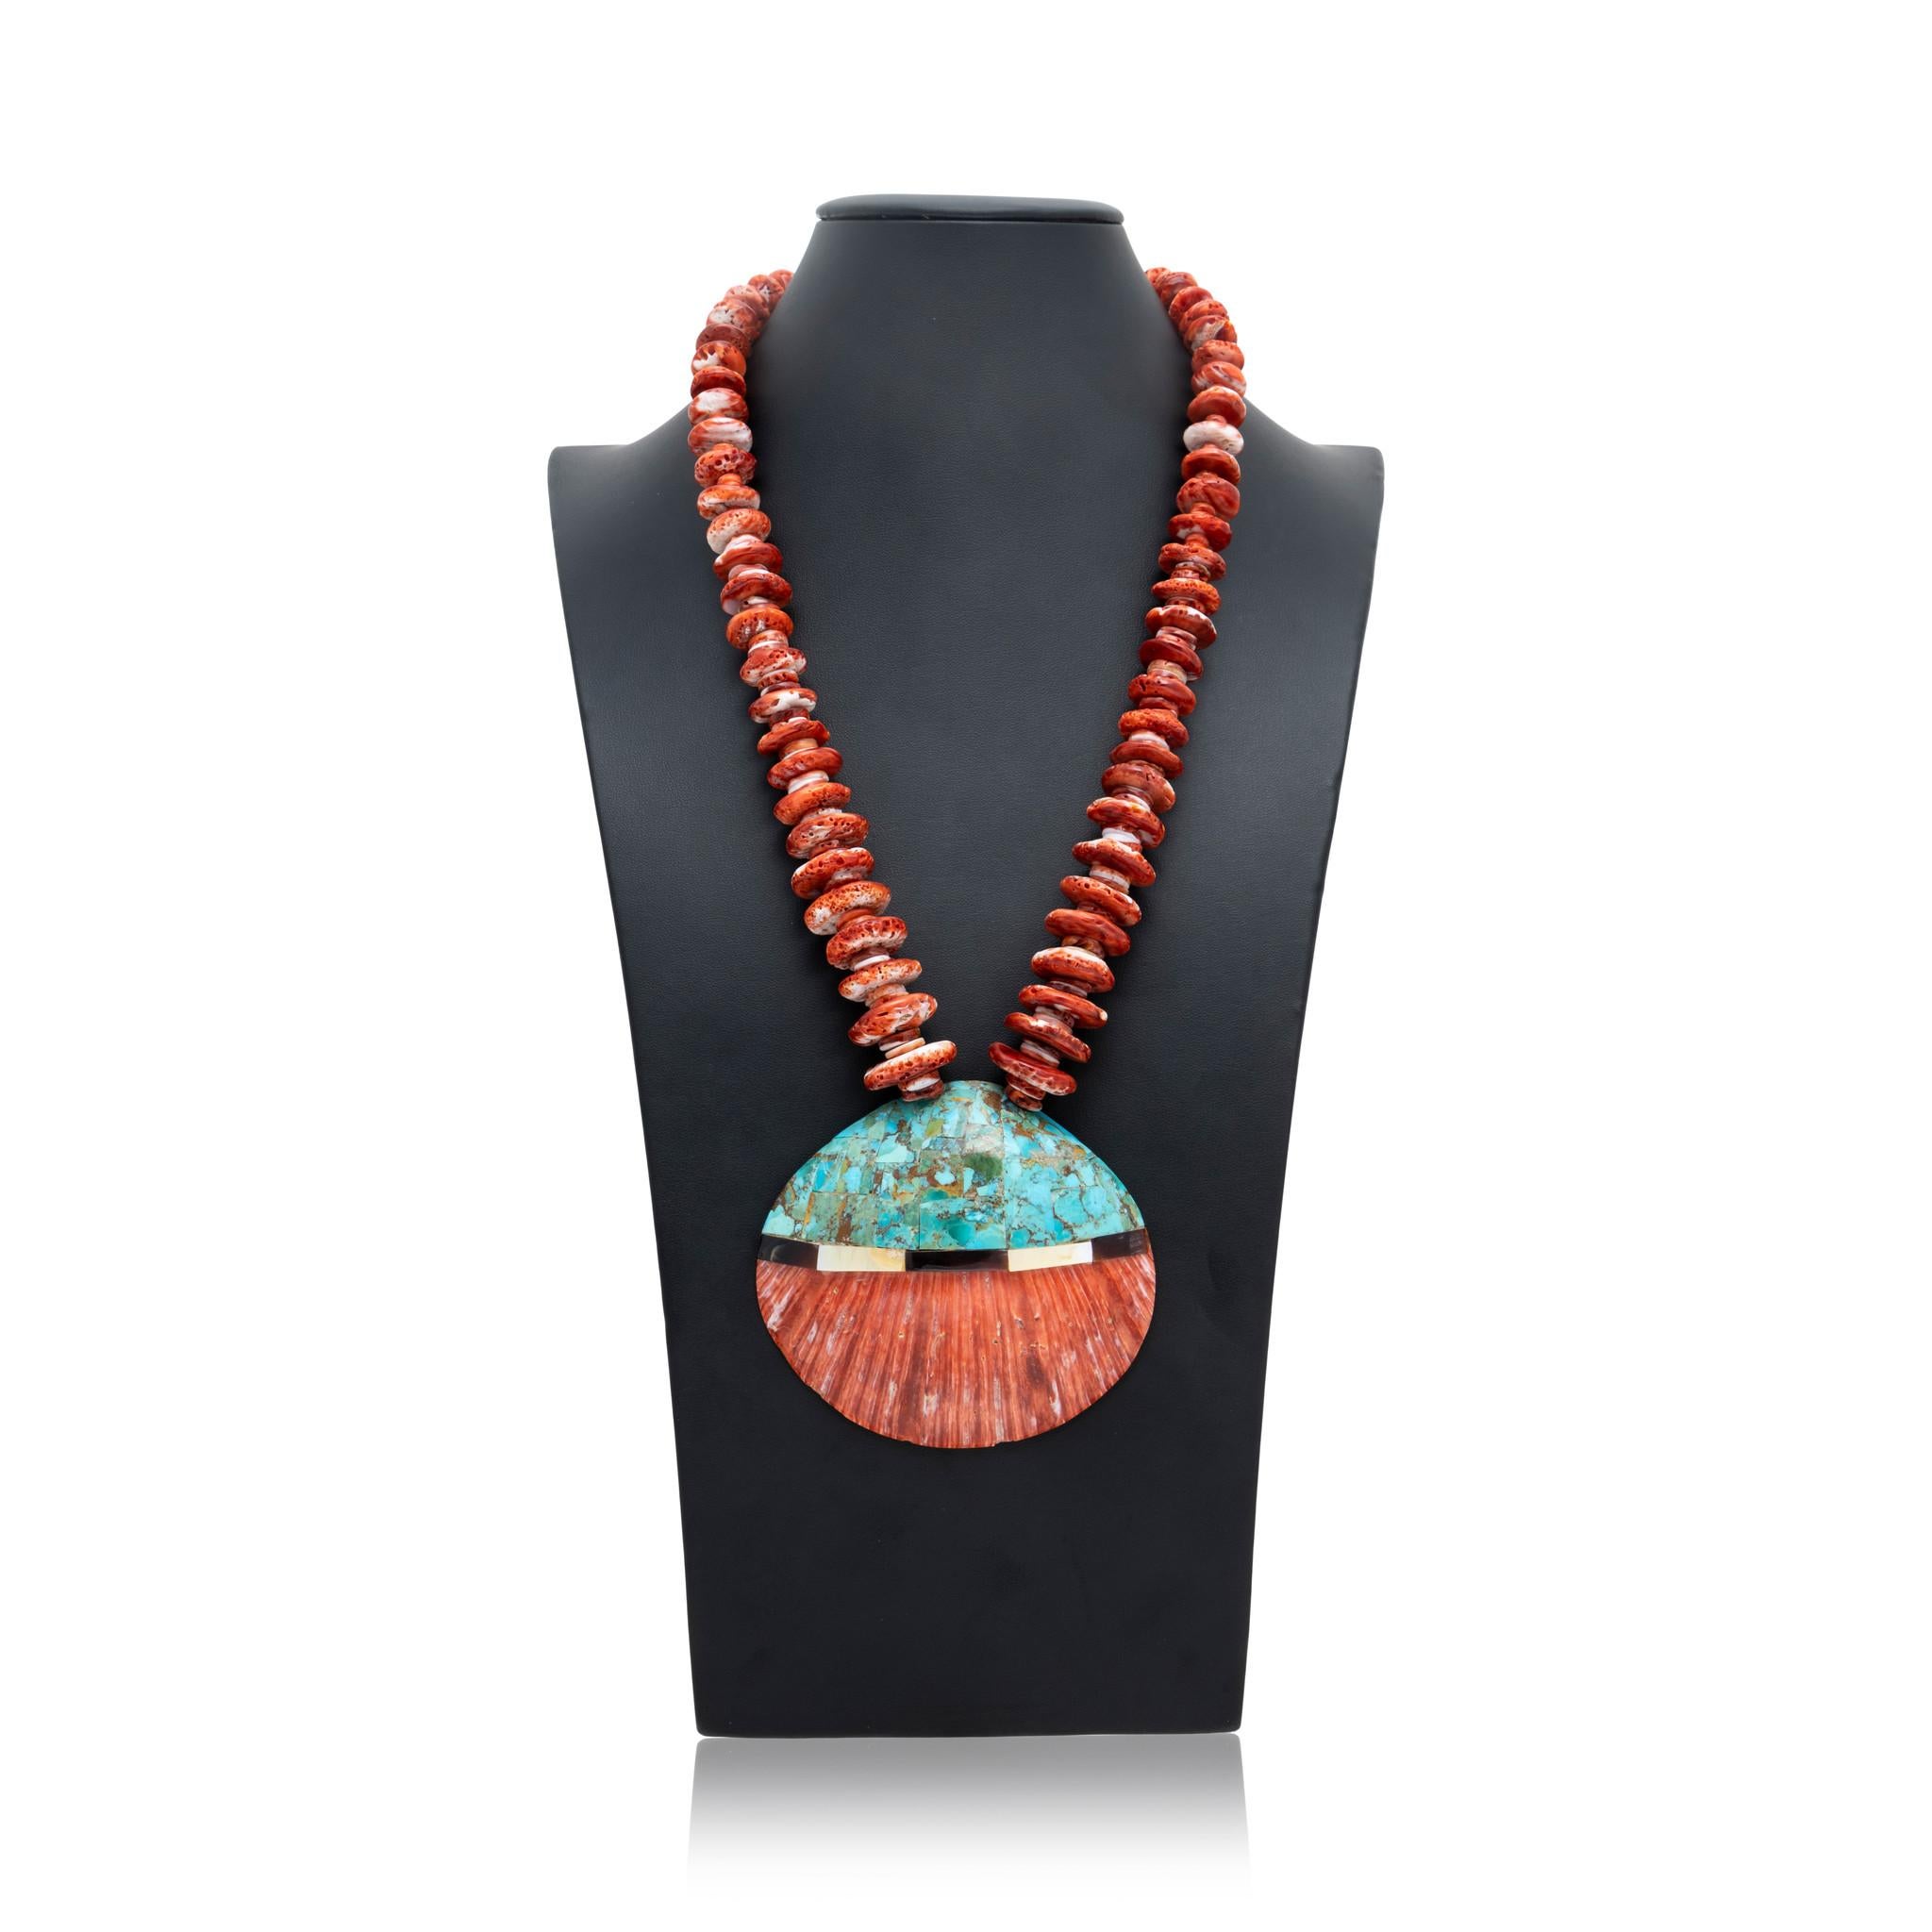 Native American Santo Domingo Indian burnt orange spiny oyster necklace. Piece has beaded chain with large and small round spiny oyster beads, featuring large shell pendant inlaid with Kingman turquoise, mother of pearl and onyx. Traditional Santo